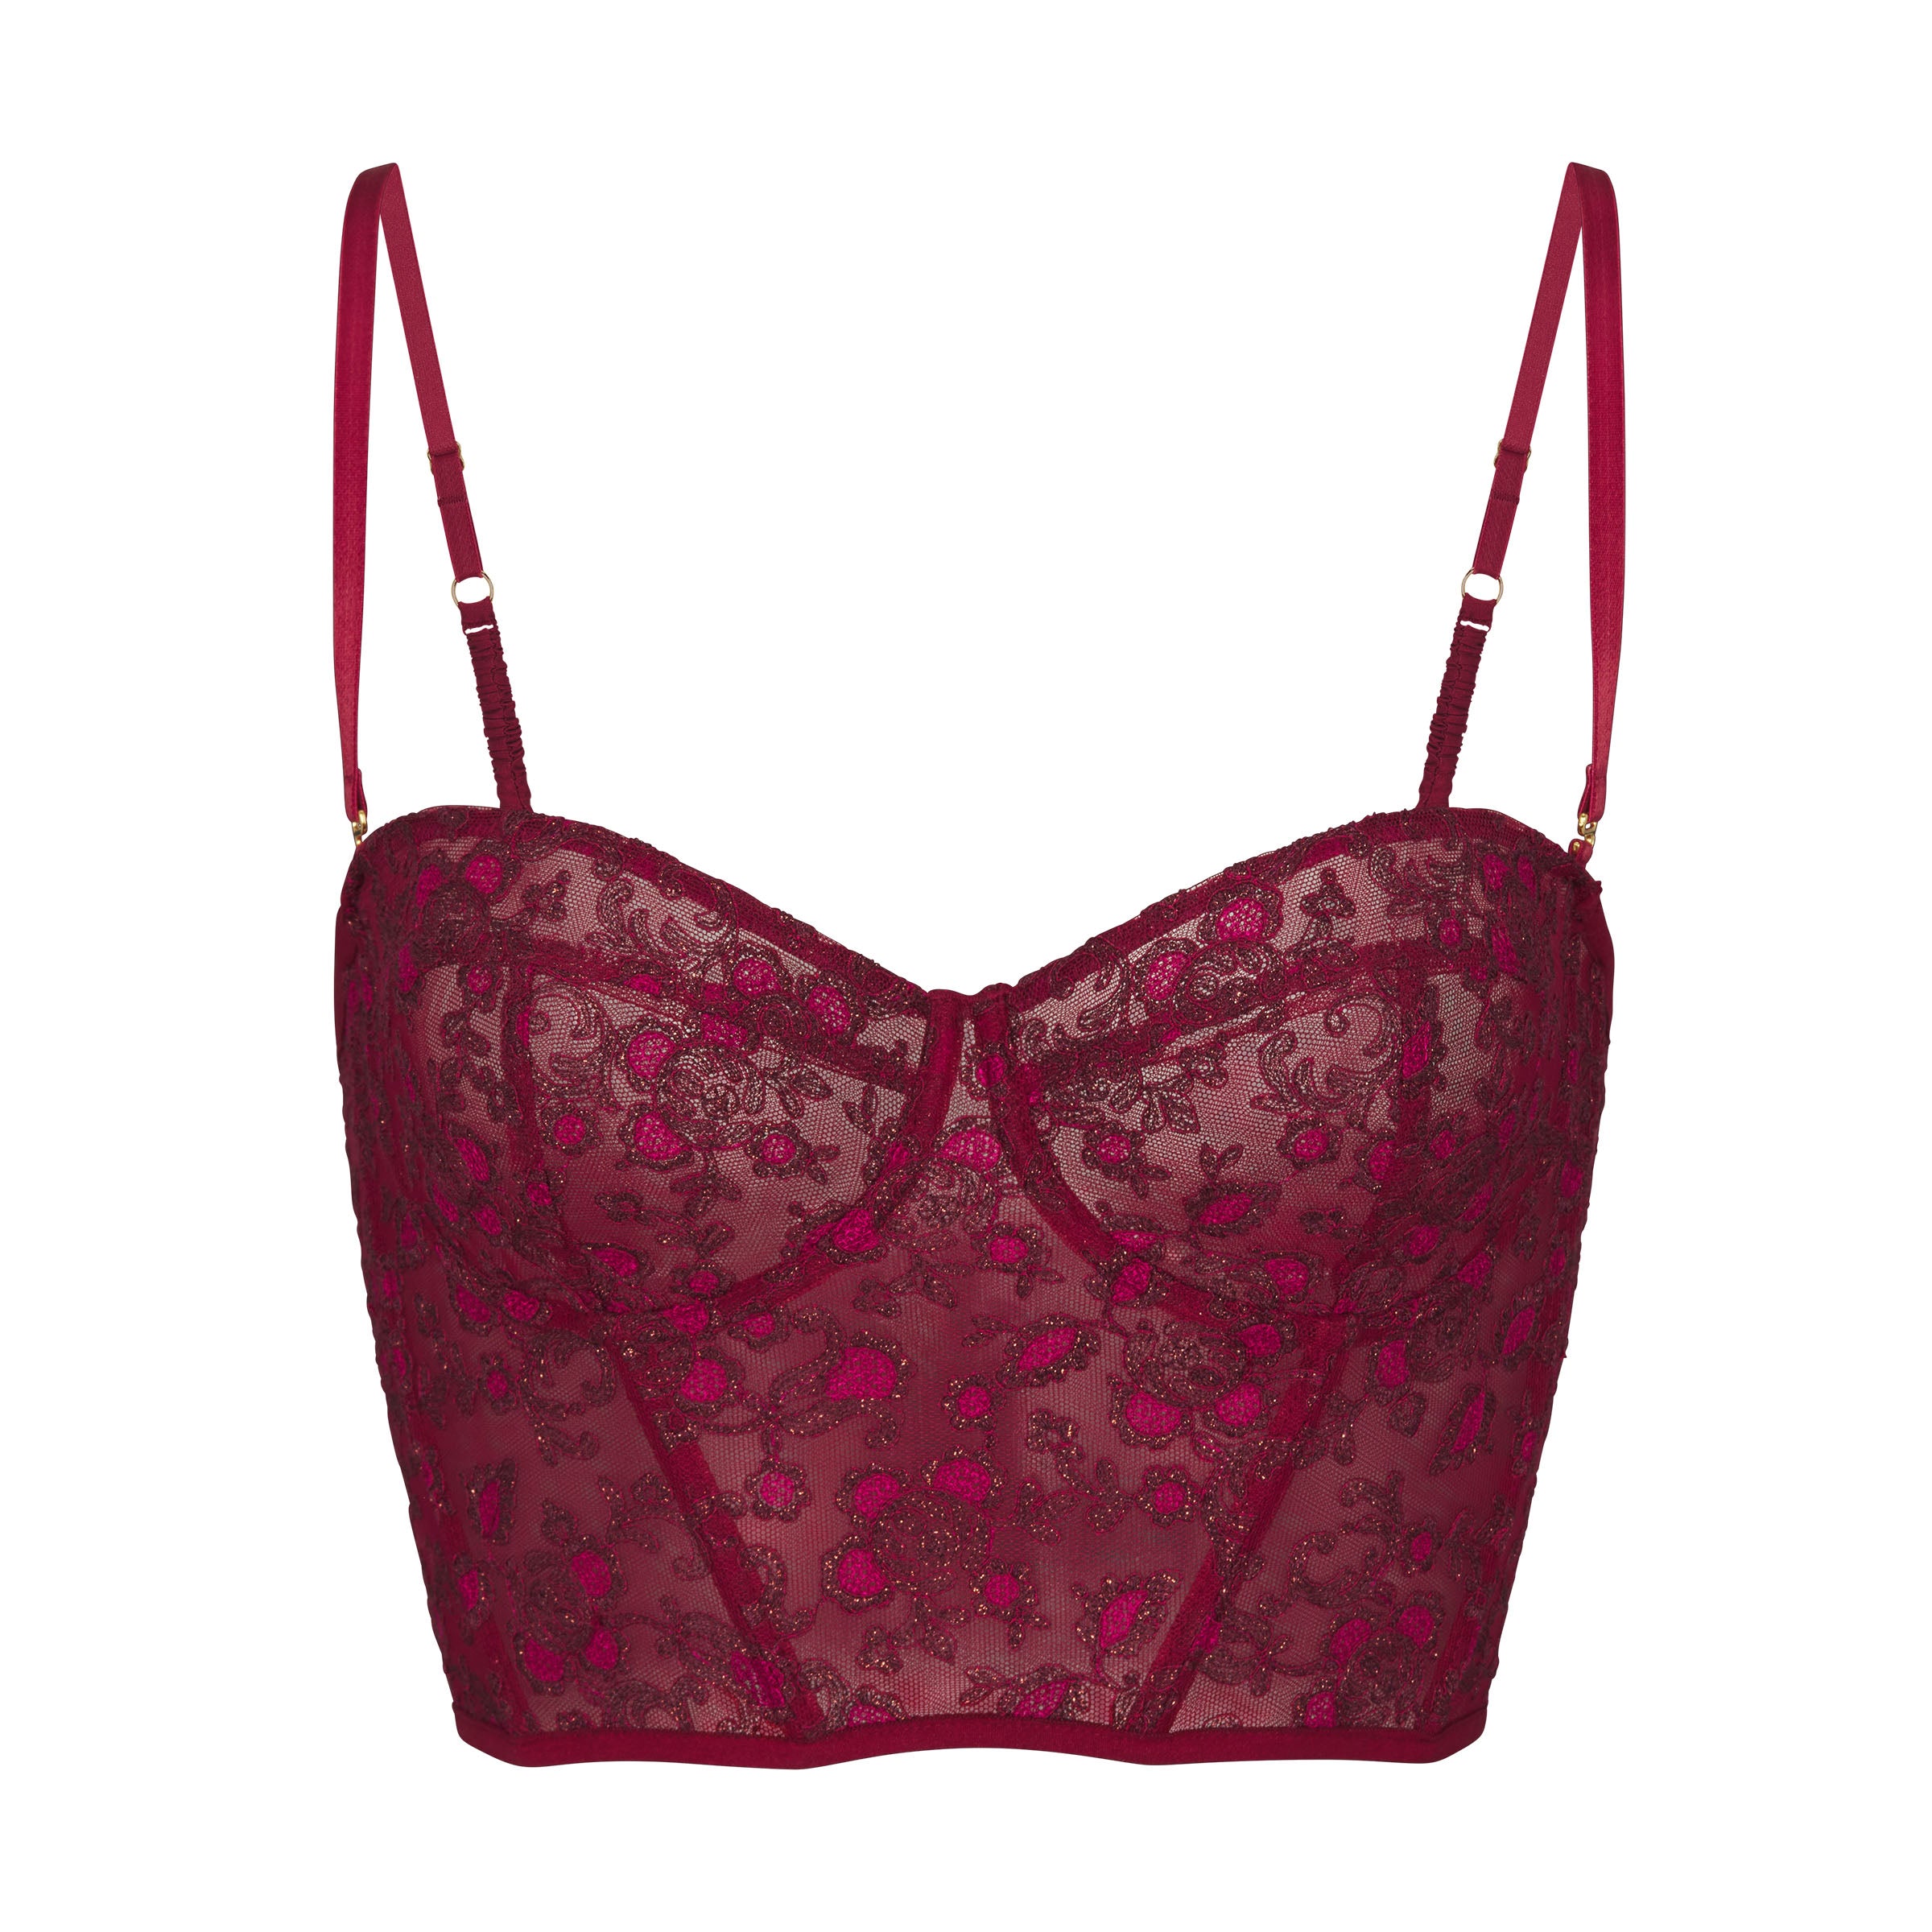 NEW VICTORIA'S SECRET PINK STRAPPY ALL OVER LACE CHEEKSTER PANTY DESIRE RED  M